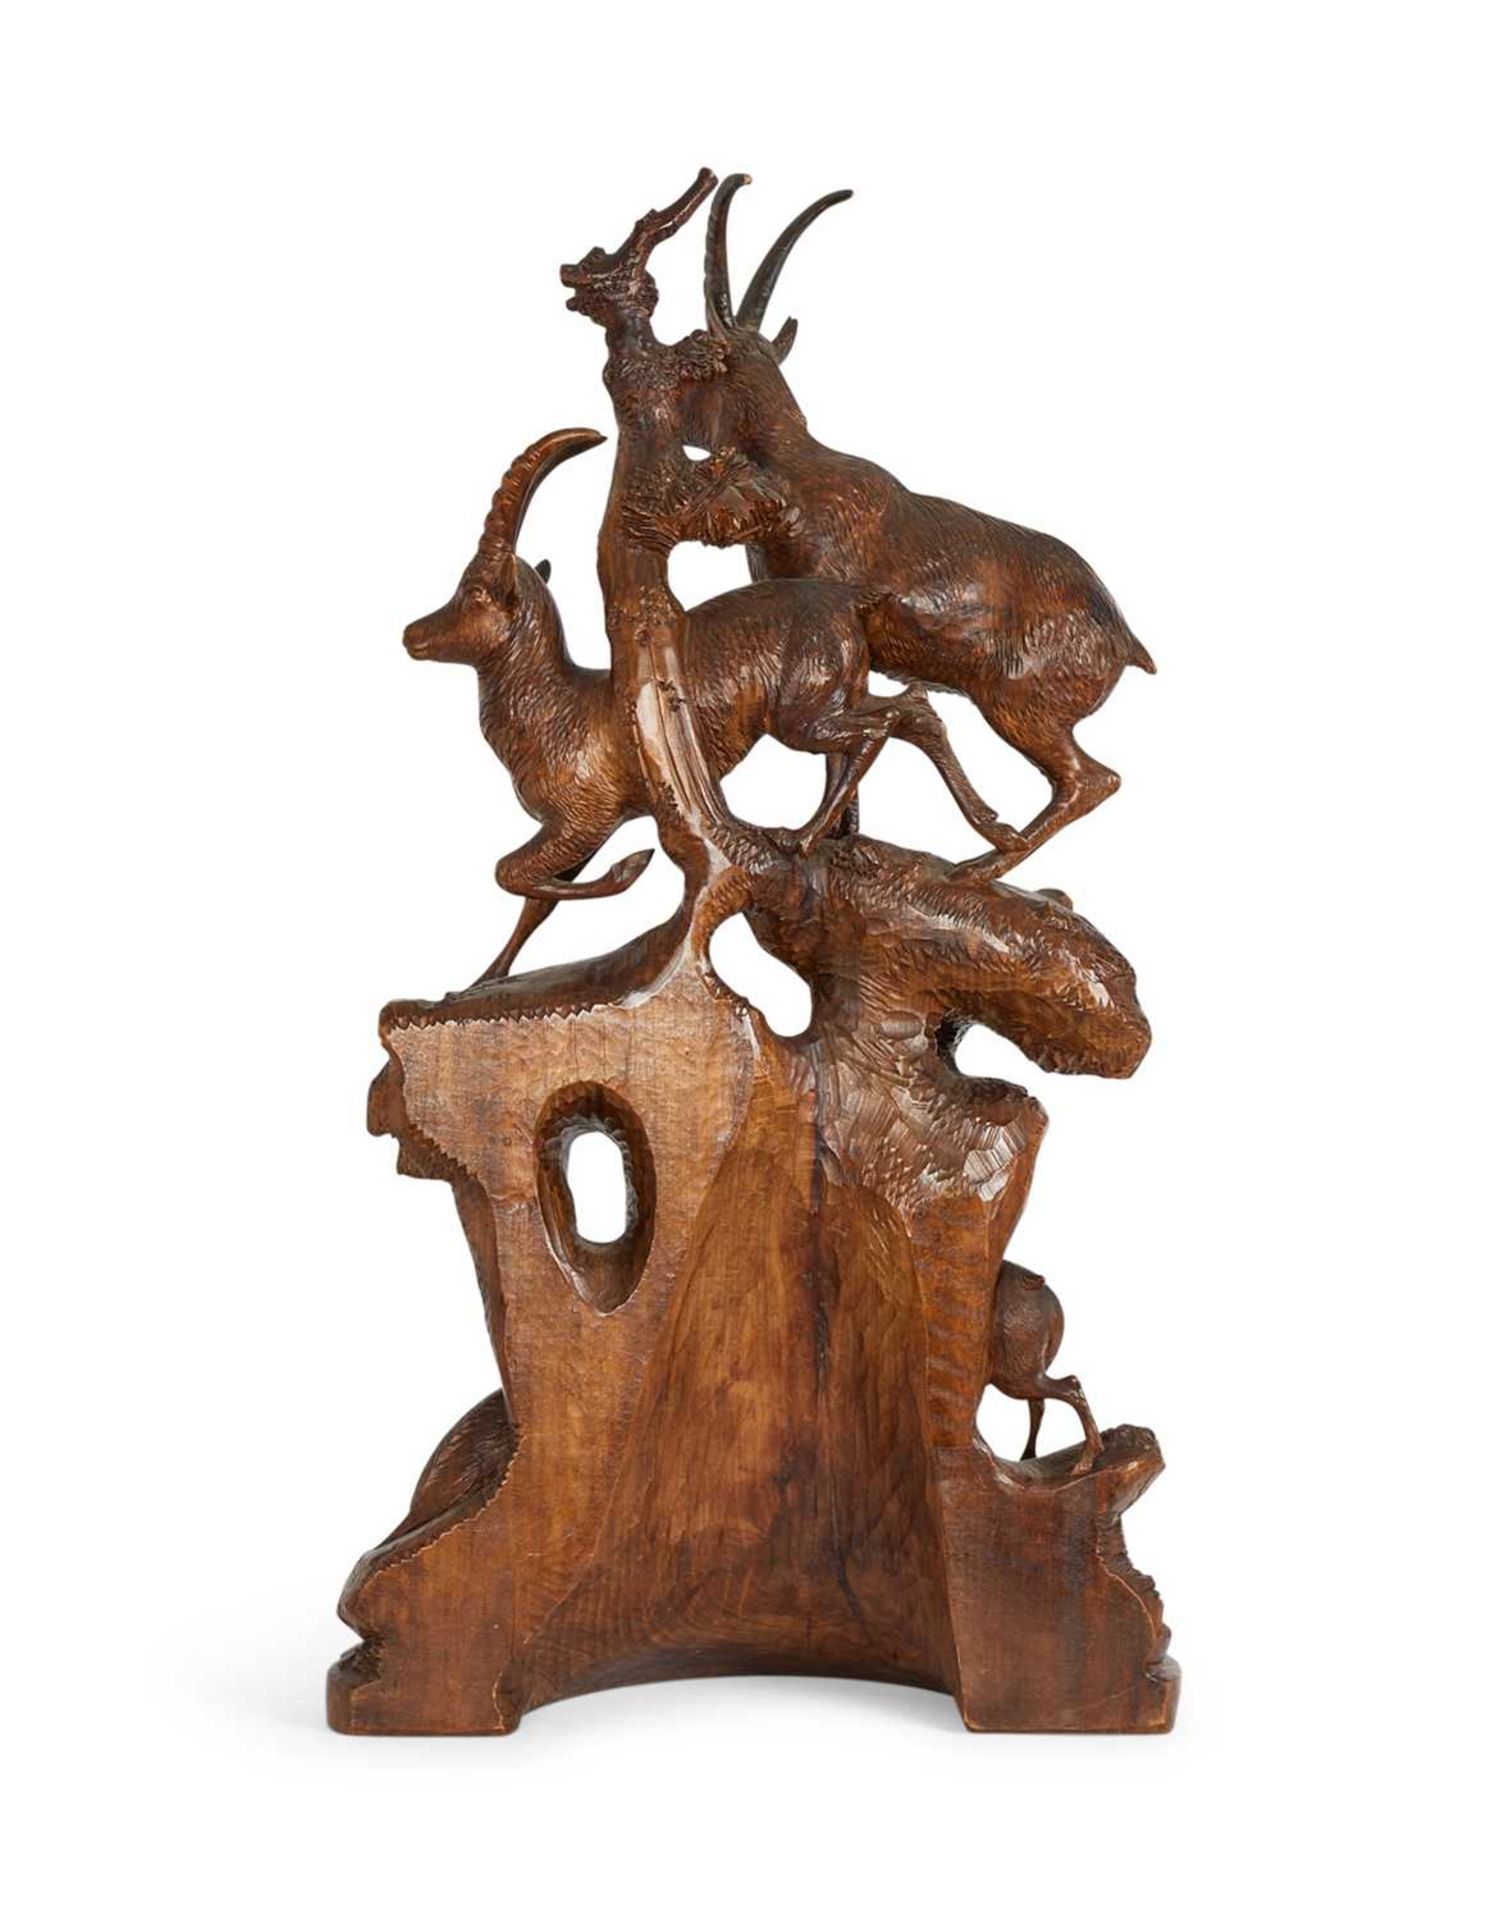 A LARGE LATE 19TH CENTURY BLACK FOREST CARVED LINDENWOOD GROUP OF IBEXES - Image 2 of 5